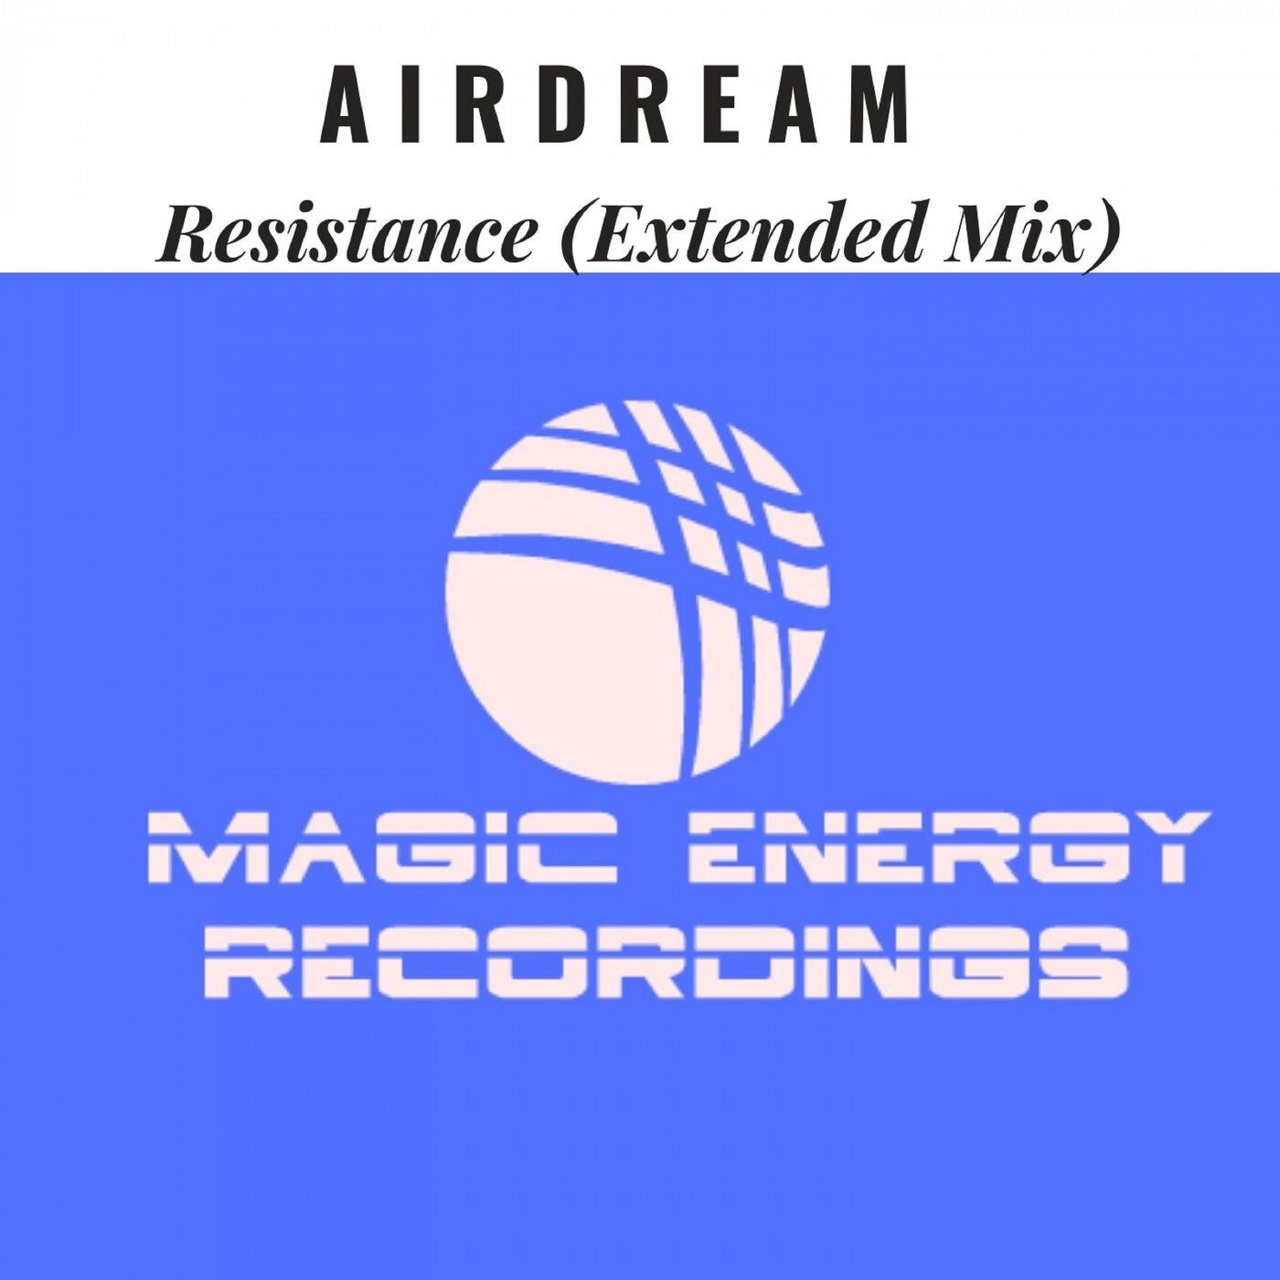 Airdream - Resistance (Extended Mix)